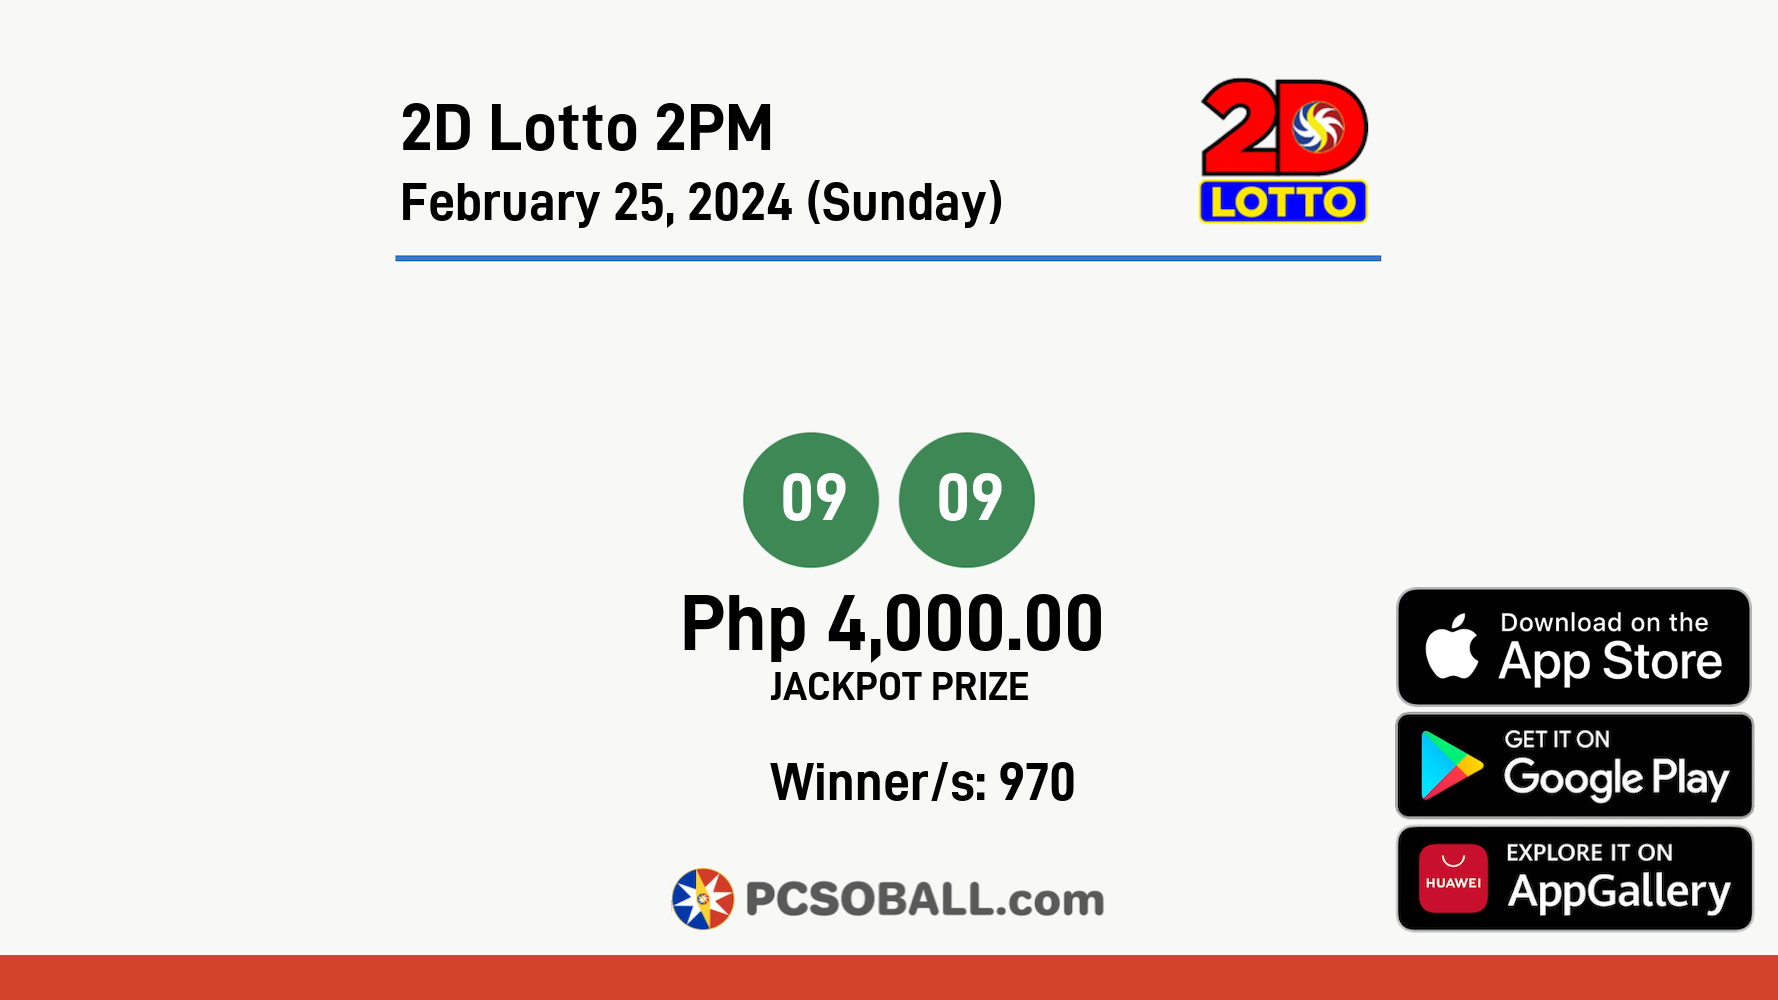 2D Lotto 2PM February 25, 2024 (Sunday) Result